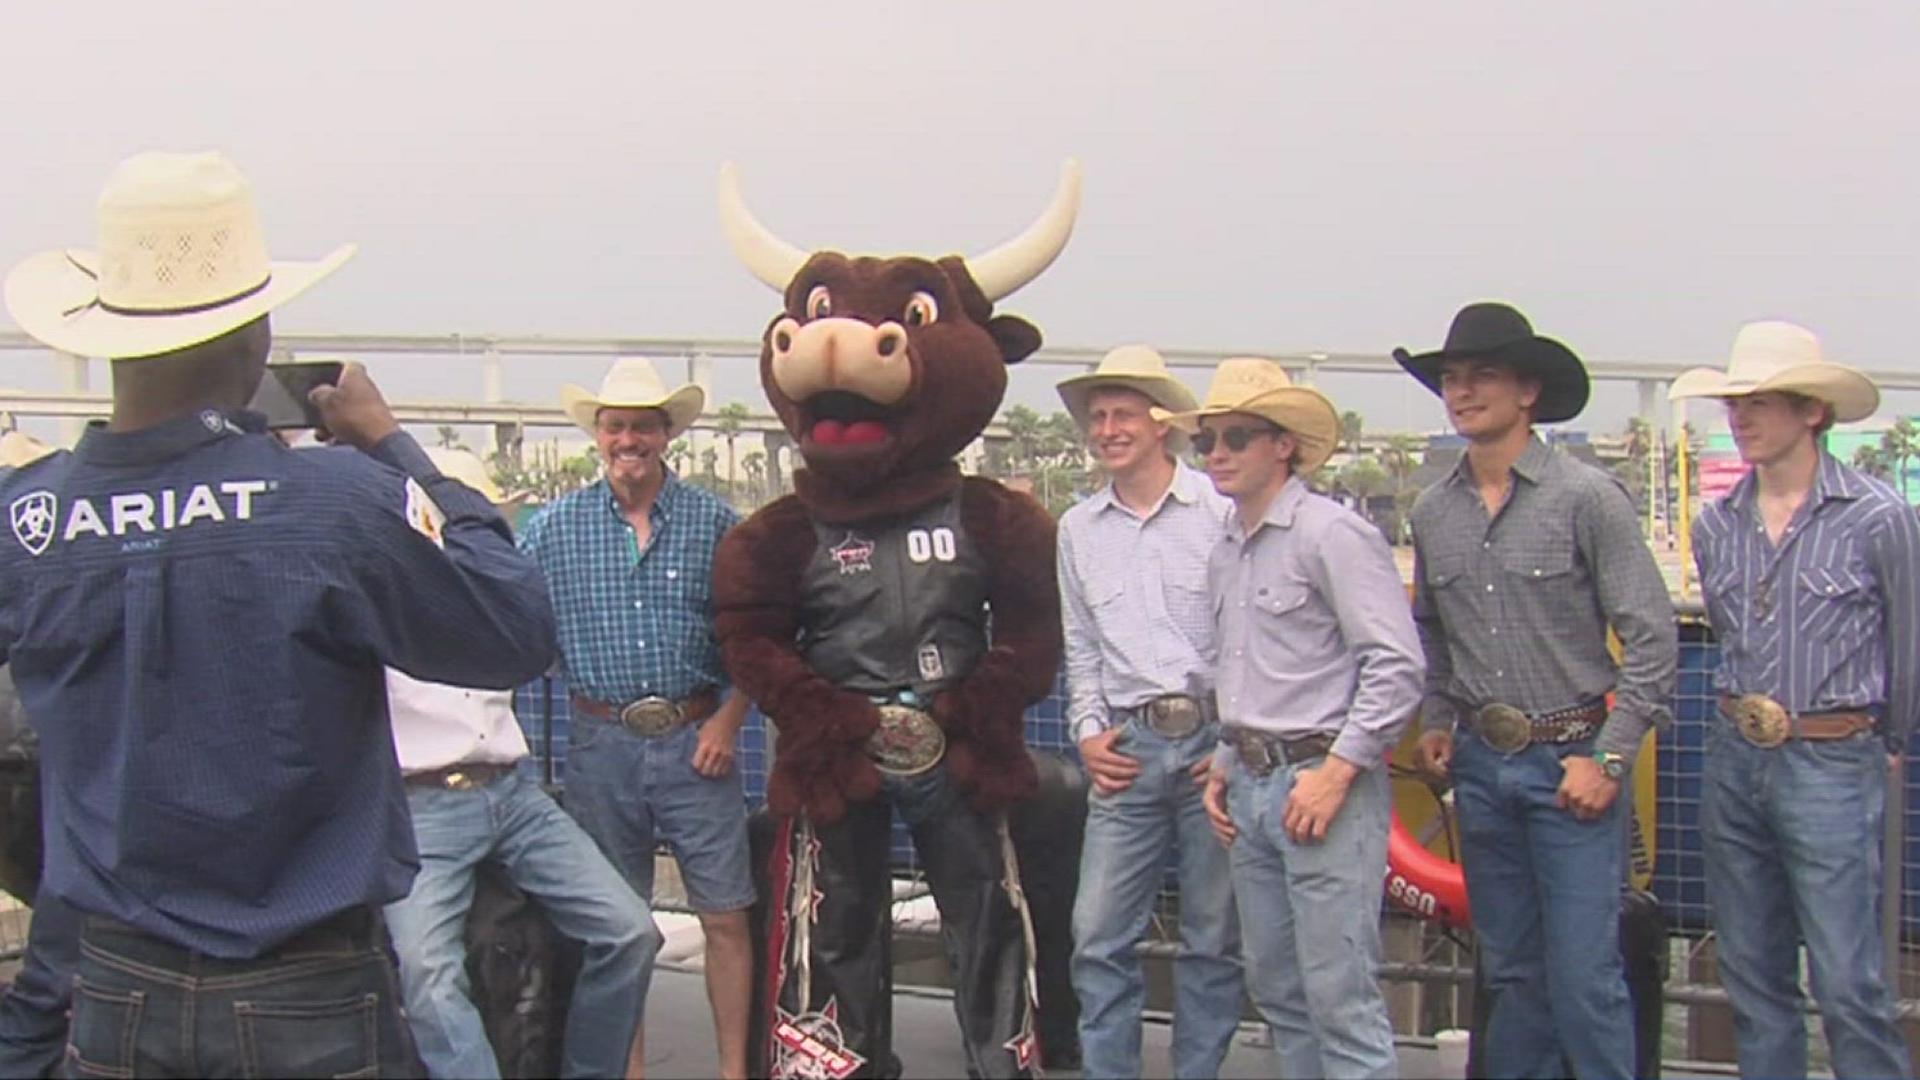 The event kick off was held aboard 'The Blue Ghost' on Friday morning with the PBR's top bucking bulls and Velocity Tour's most esteemed rider Michael Lane!